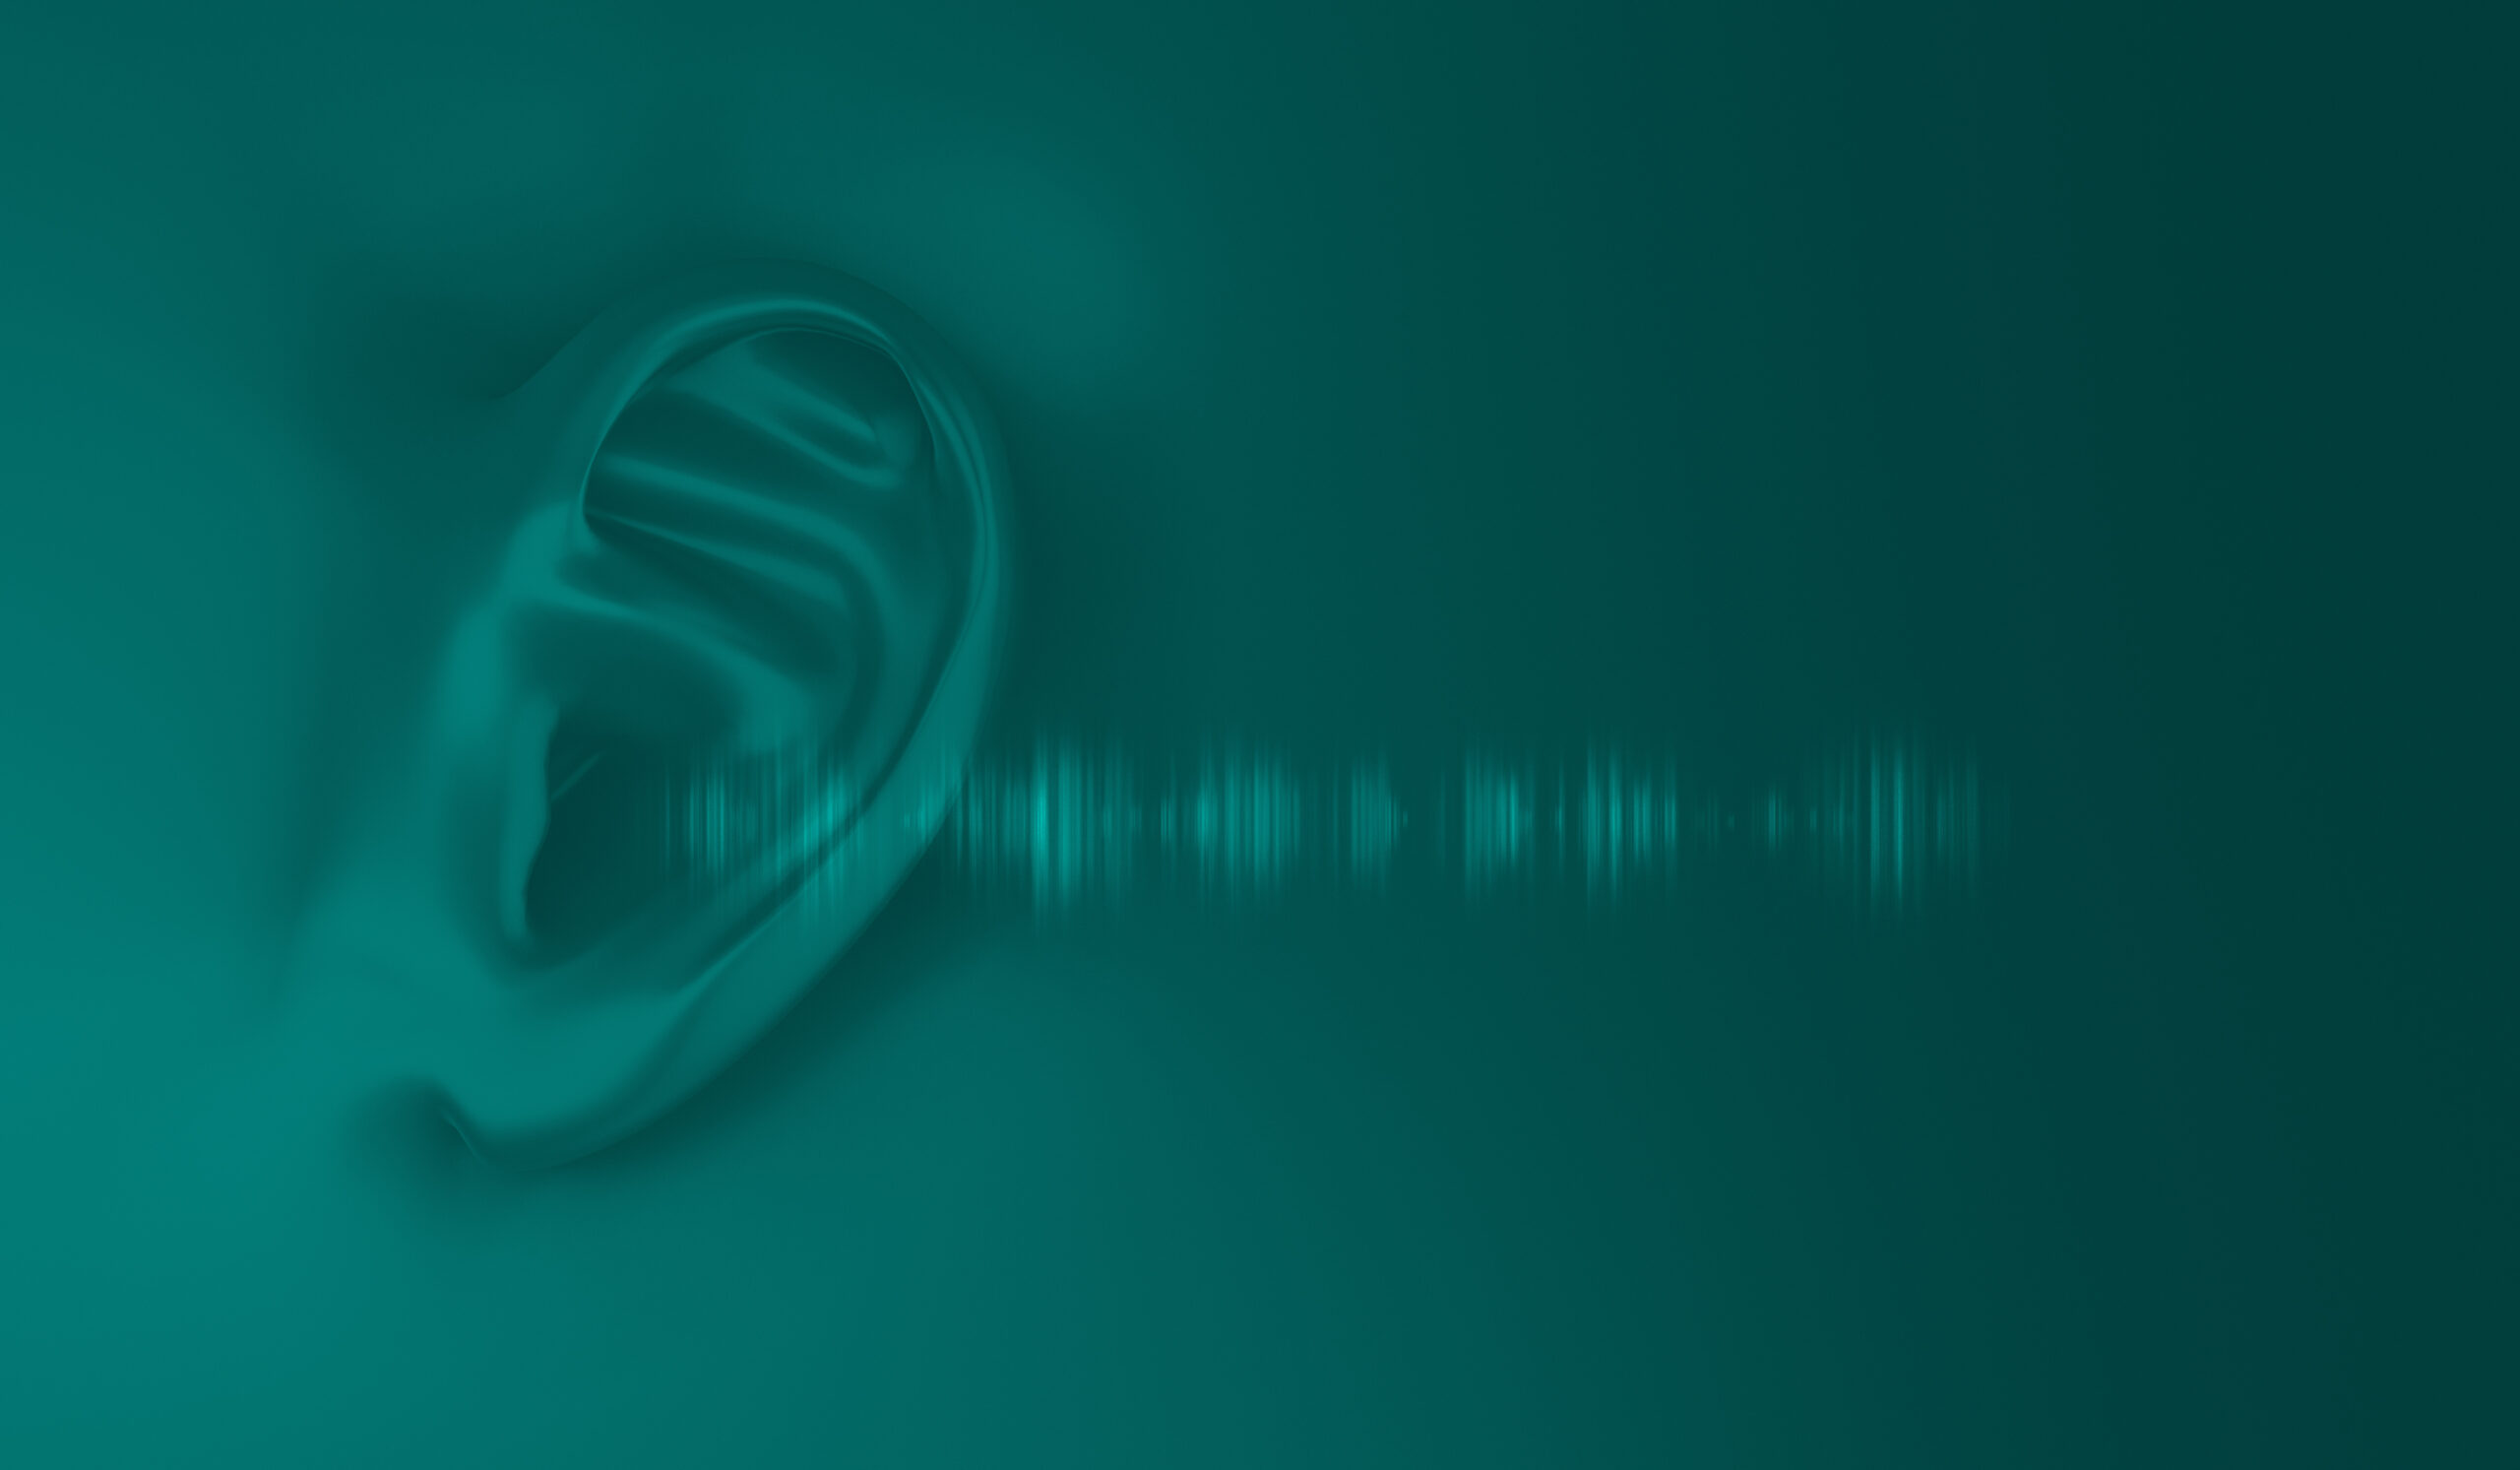 Blog feature image of a render of a human ear and audio waves representing Audiology and hearing loss